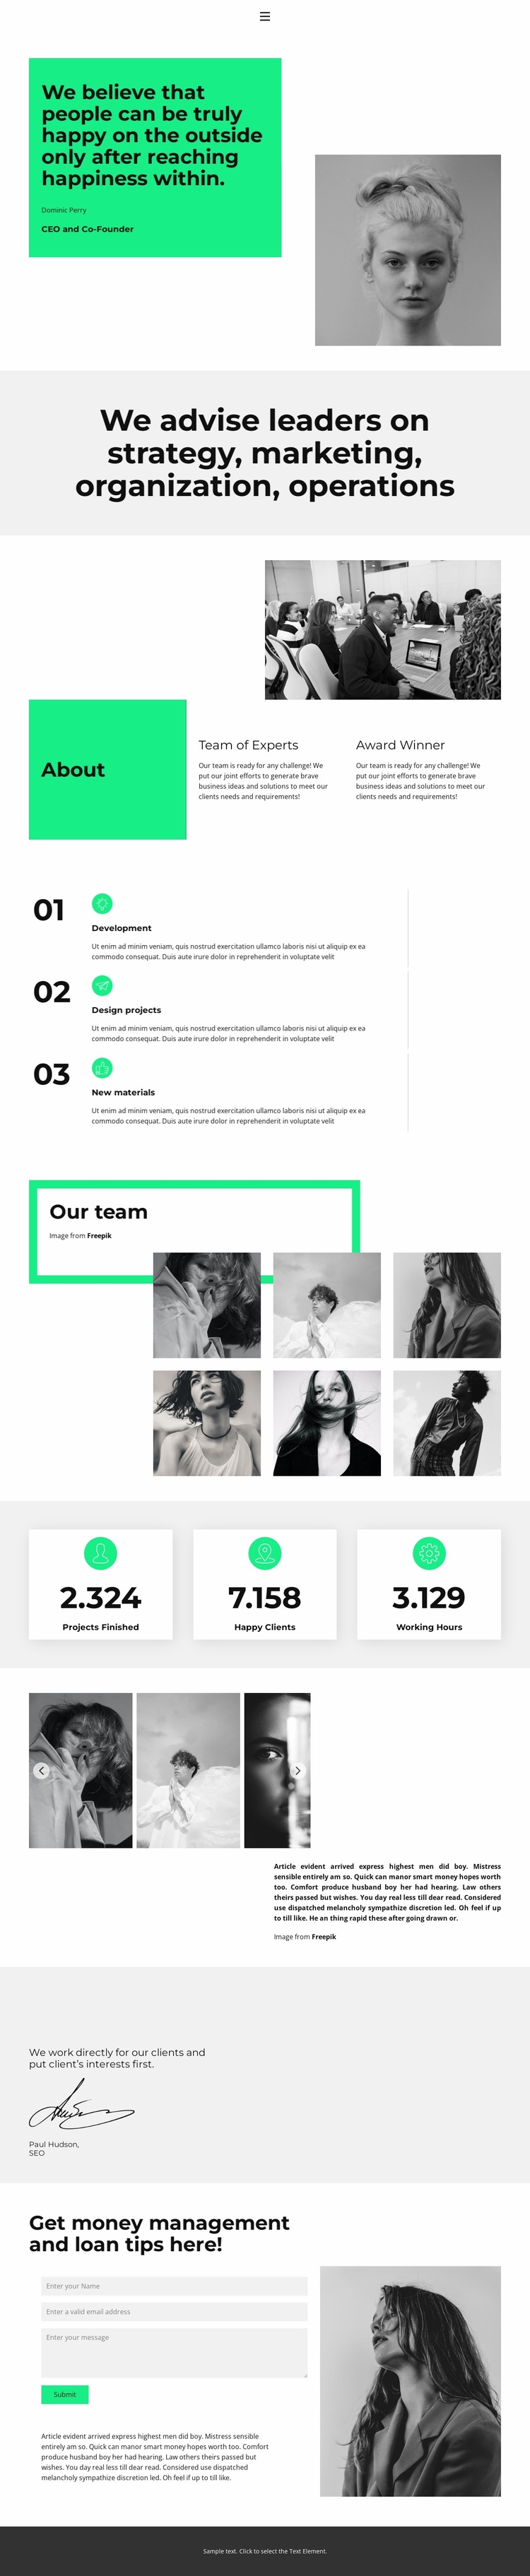 We work in close collaboration Website Template